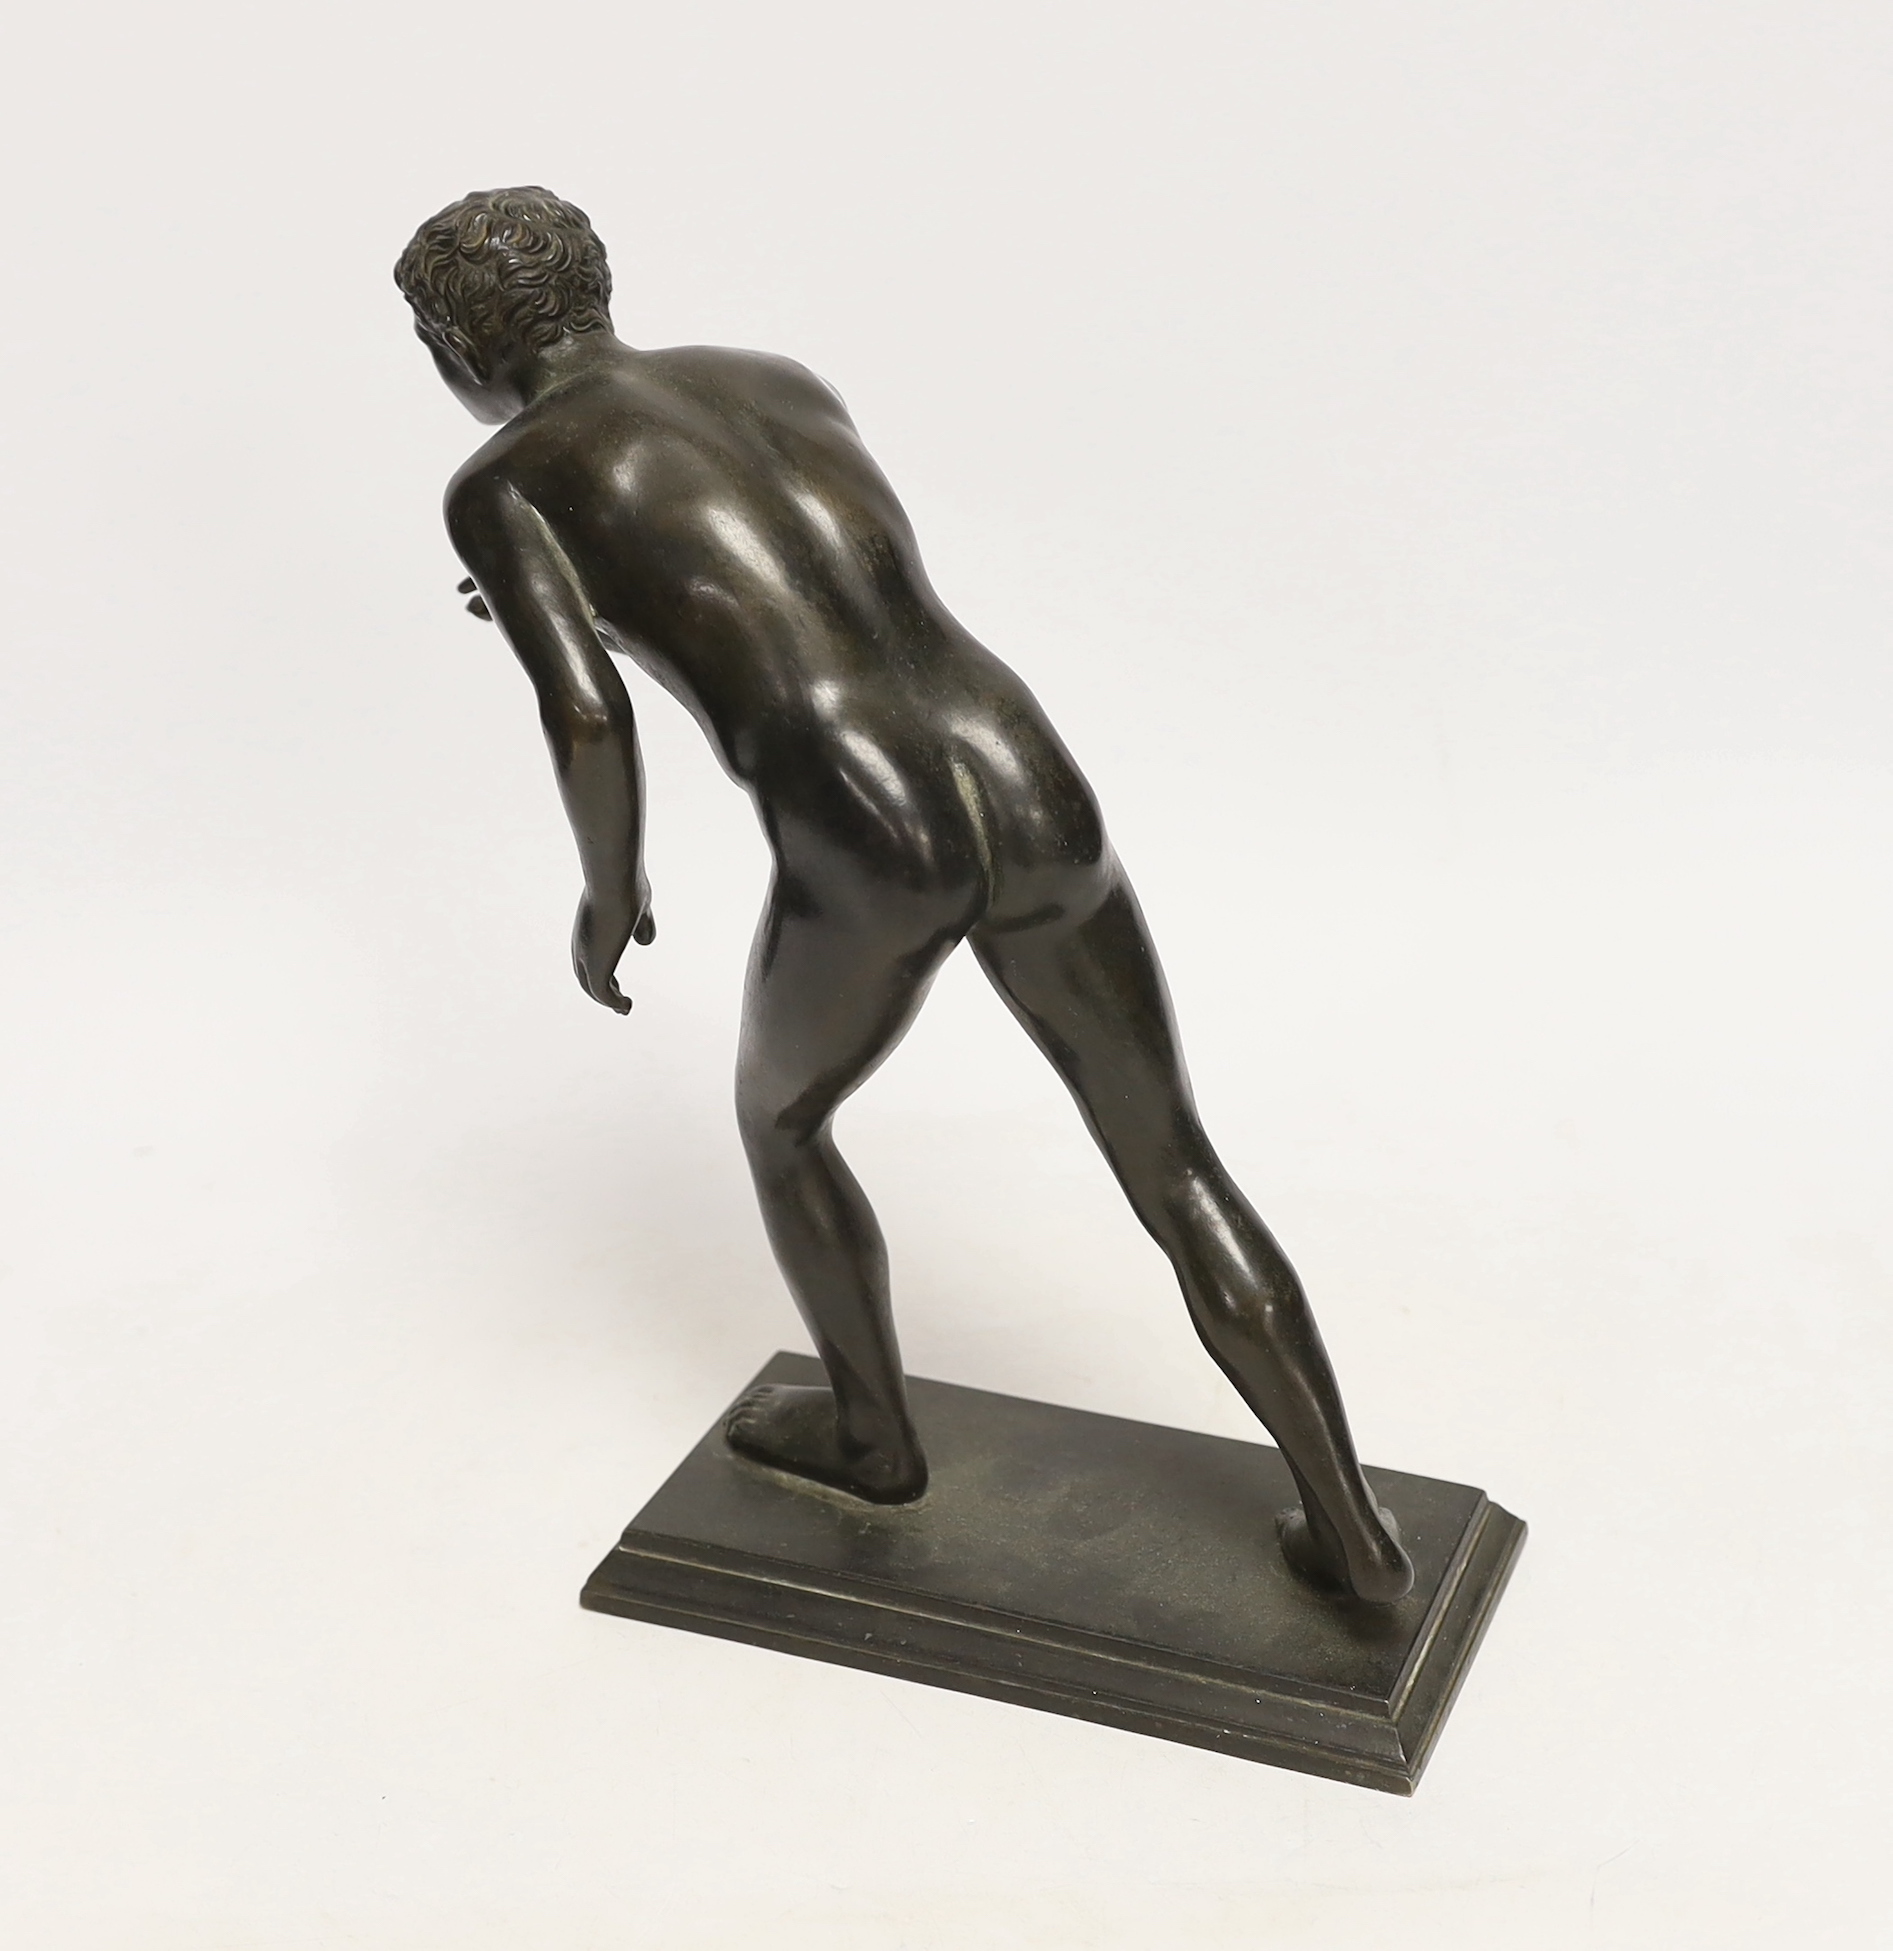 After The Antique, a bronze figure of an athlete, 26cm high - Image 2 of 3